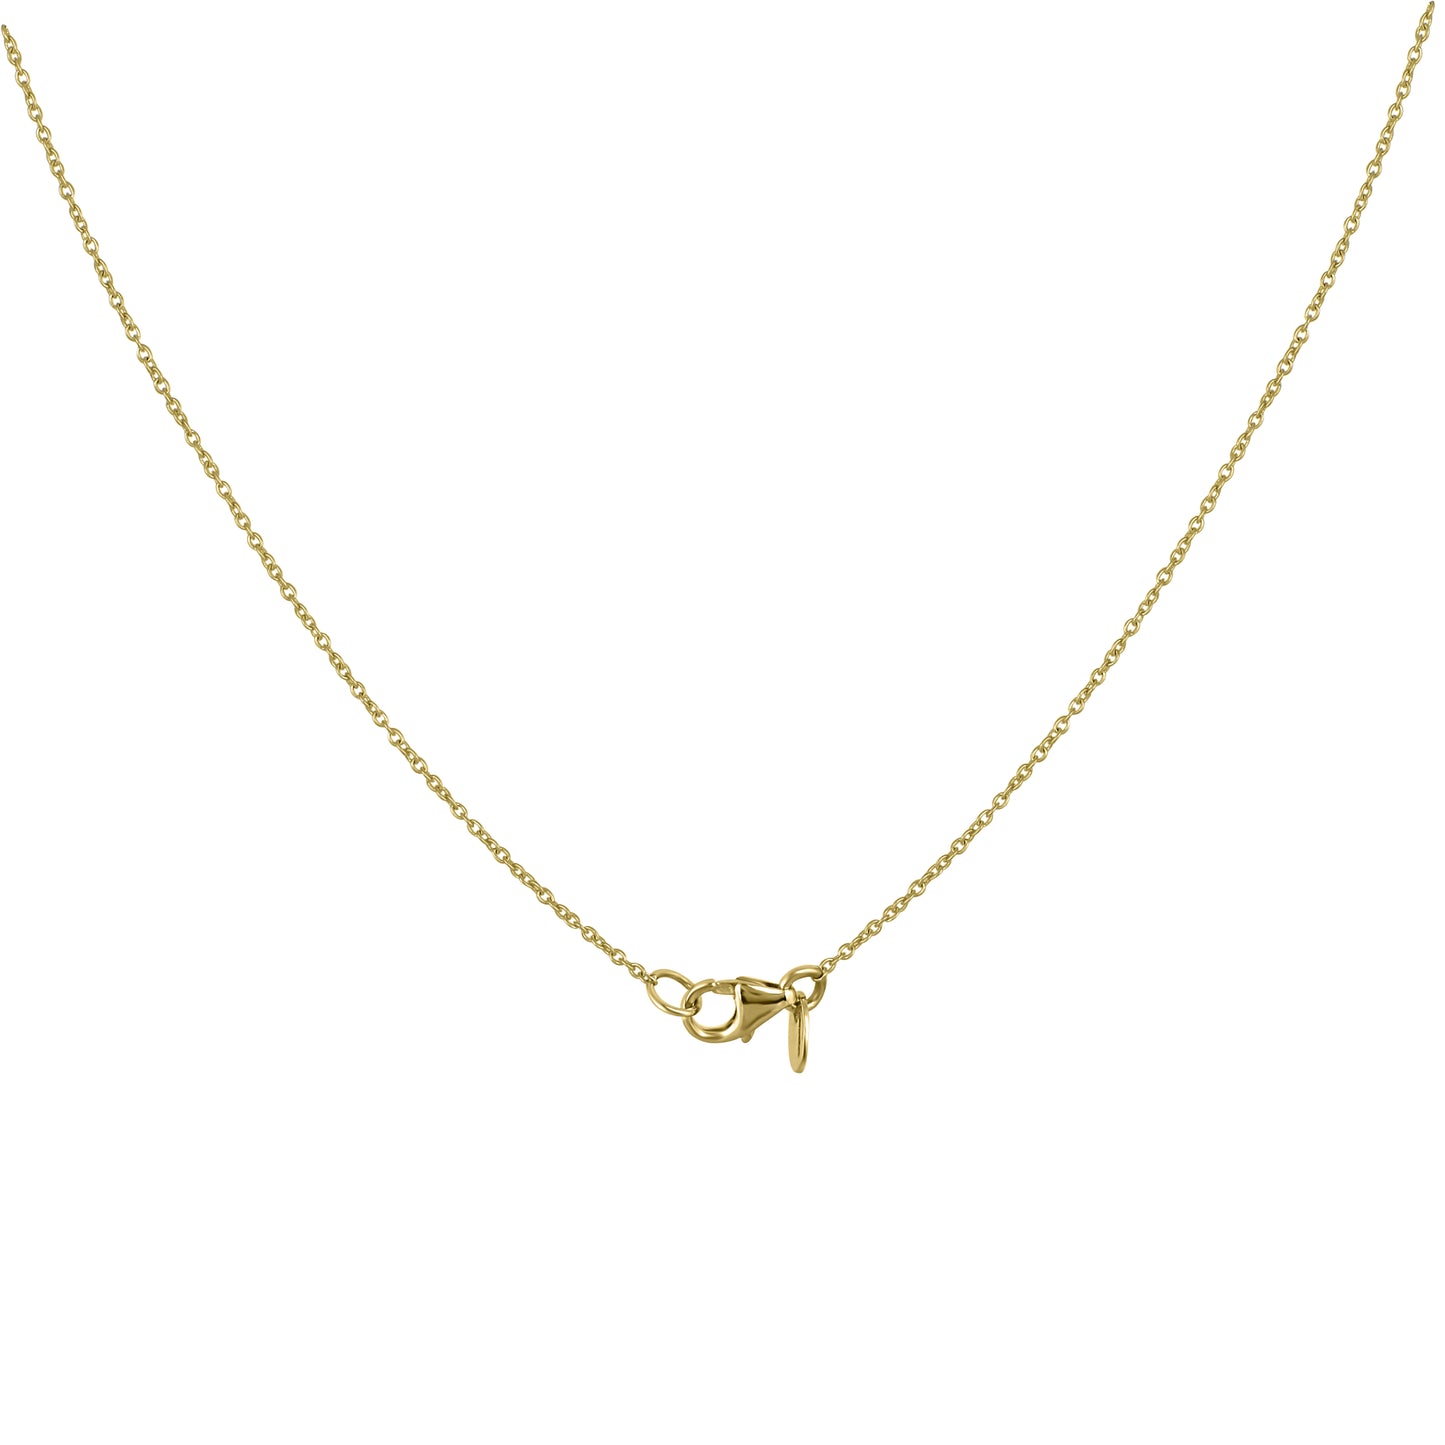 The Chestert Necklace